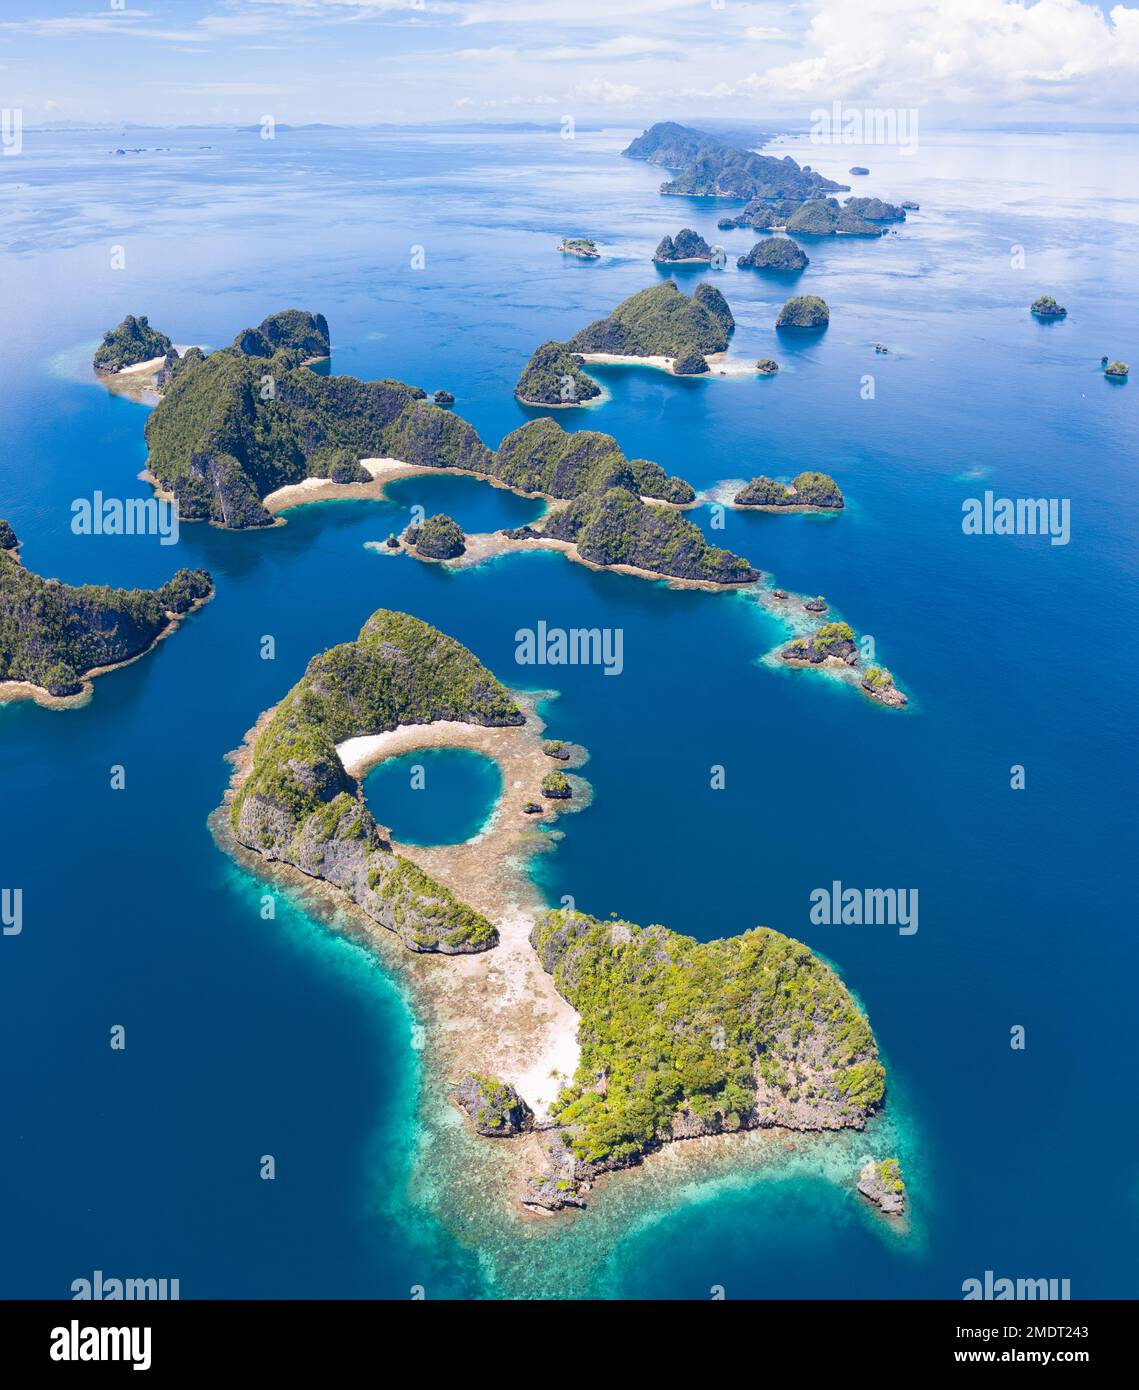 Rock islands, composed of limestone, rise from the tropical seascape in Raja Ampat, Indonesia. These islands are ancient, uplifted coral reefs. Stock Photo